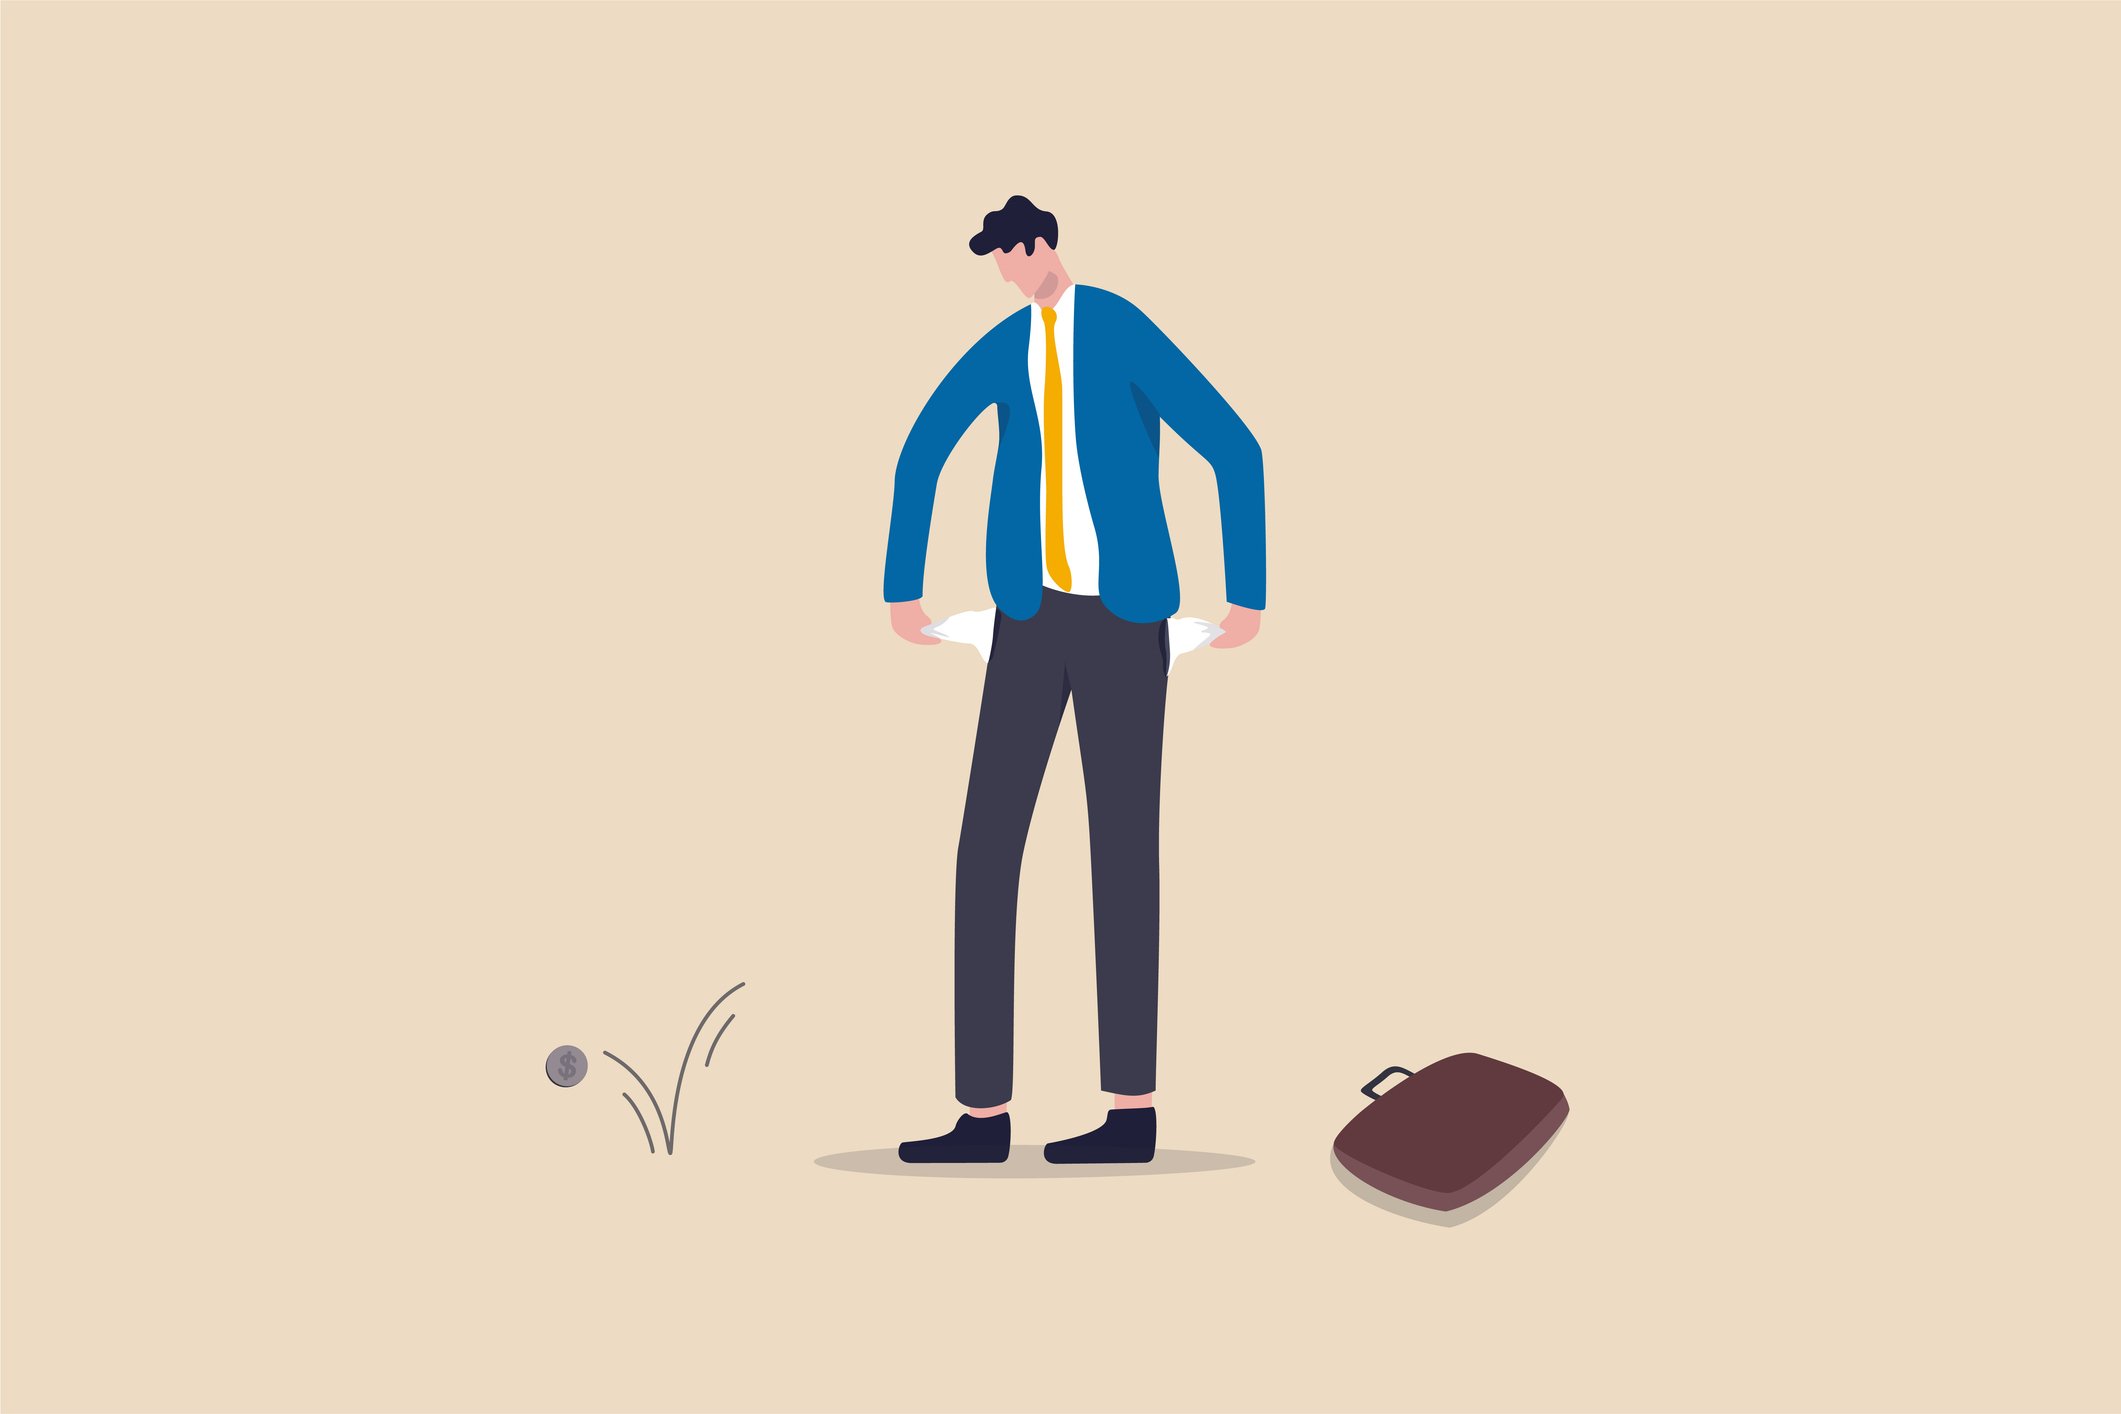 Graphic of a man with empty pockets